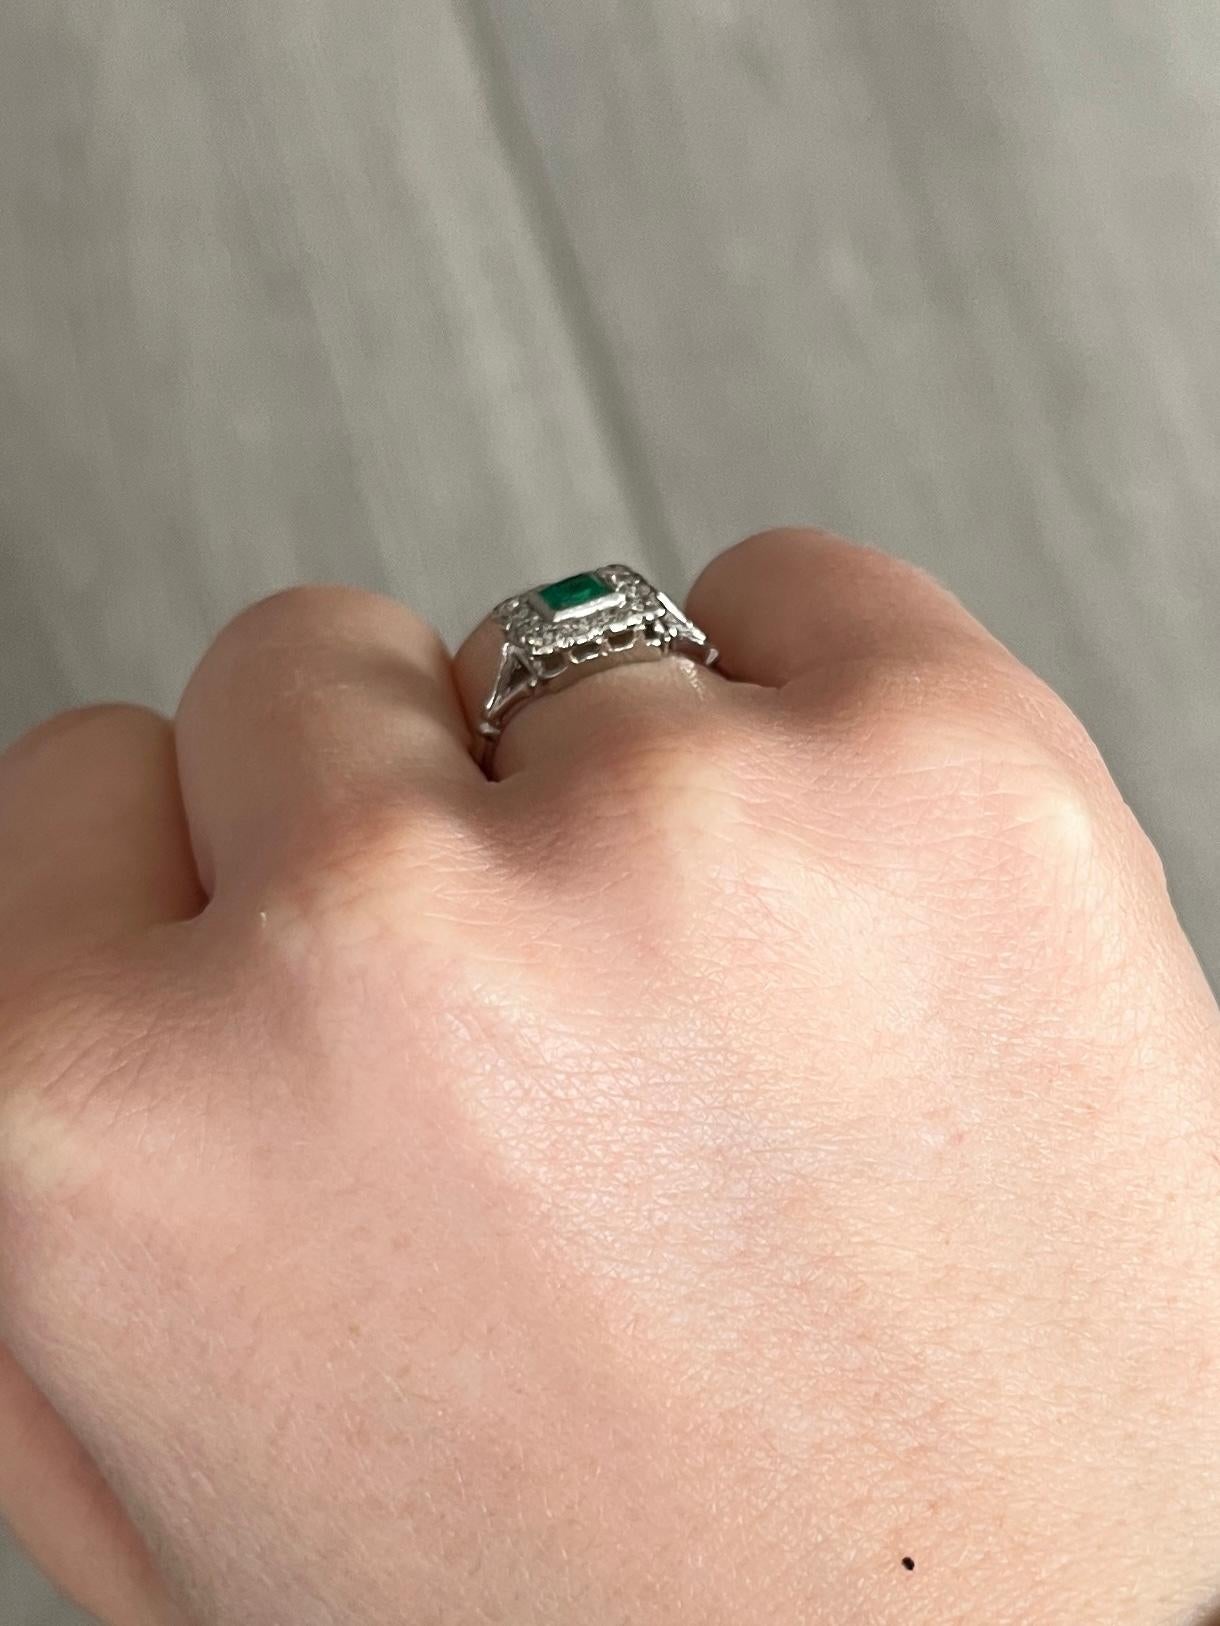 A superb antique Edwardian panel ring centrally set with a classic square-cut green emerald measuring 40pts. The emerald is bordered by beautiful white diamonds totalling aprox 36pts. The ring is modelled in platinum. 

Ring Size: N 1/2 or 7
Panel